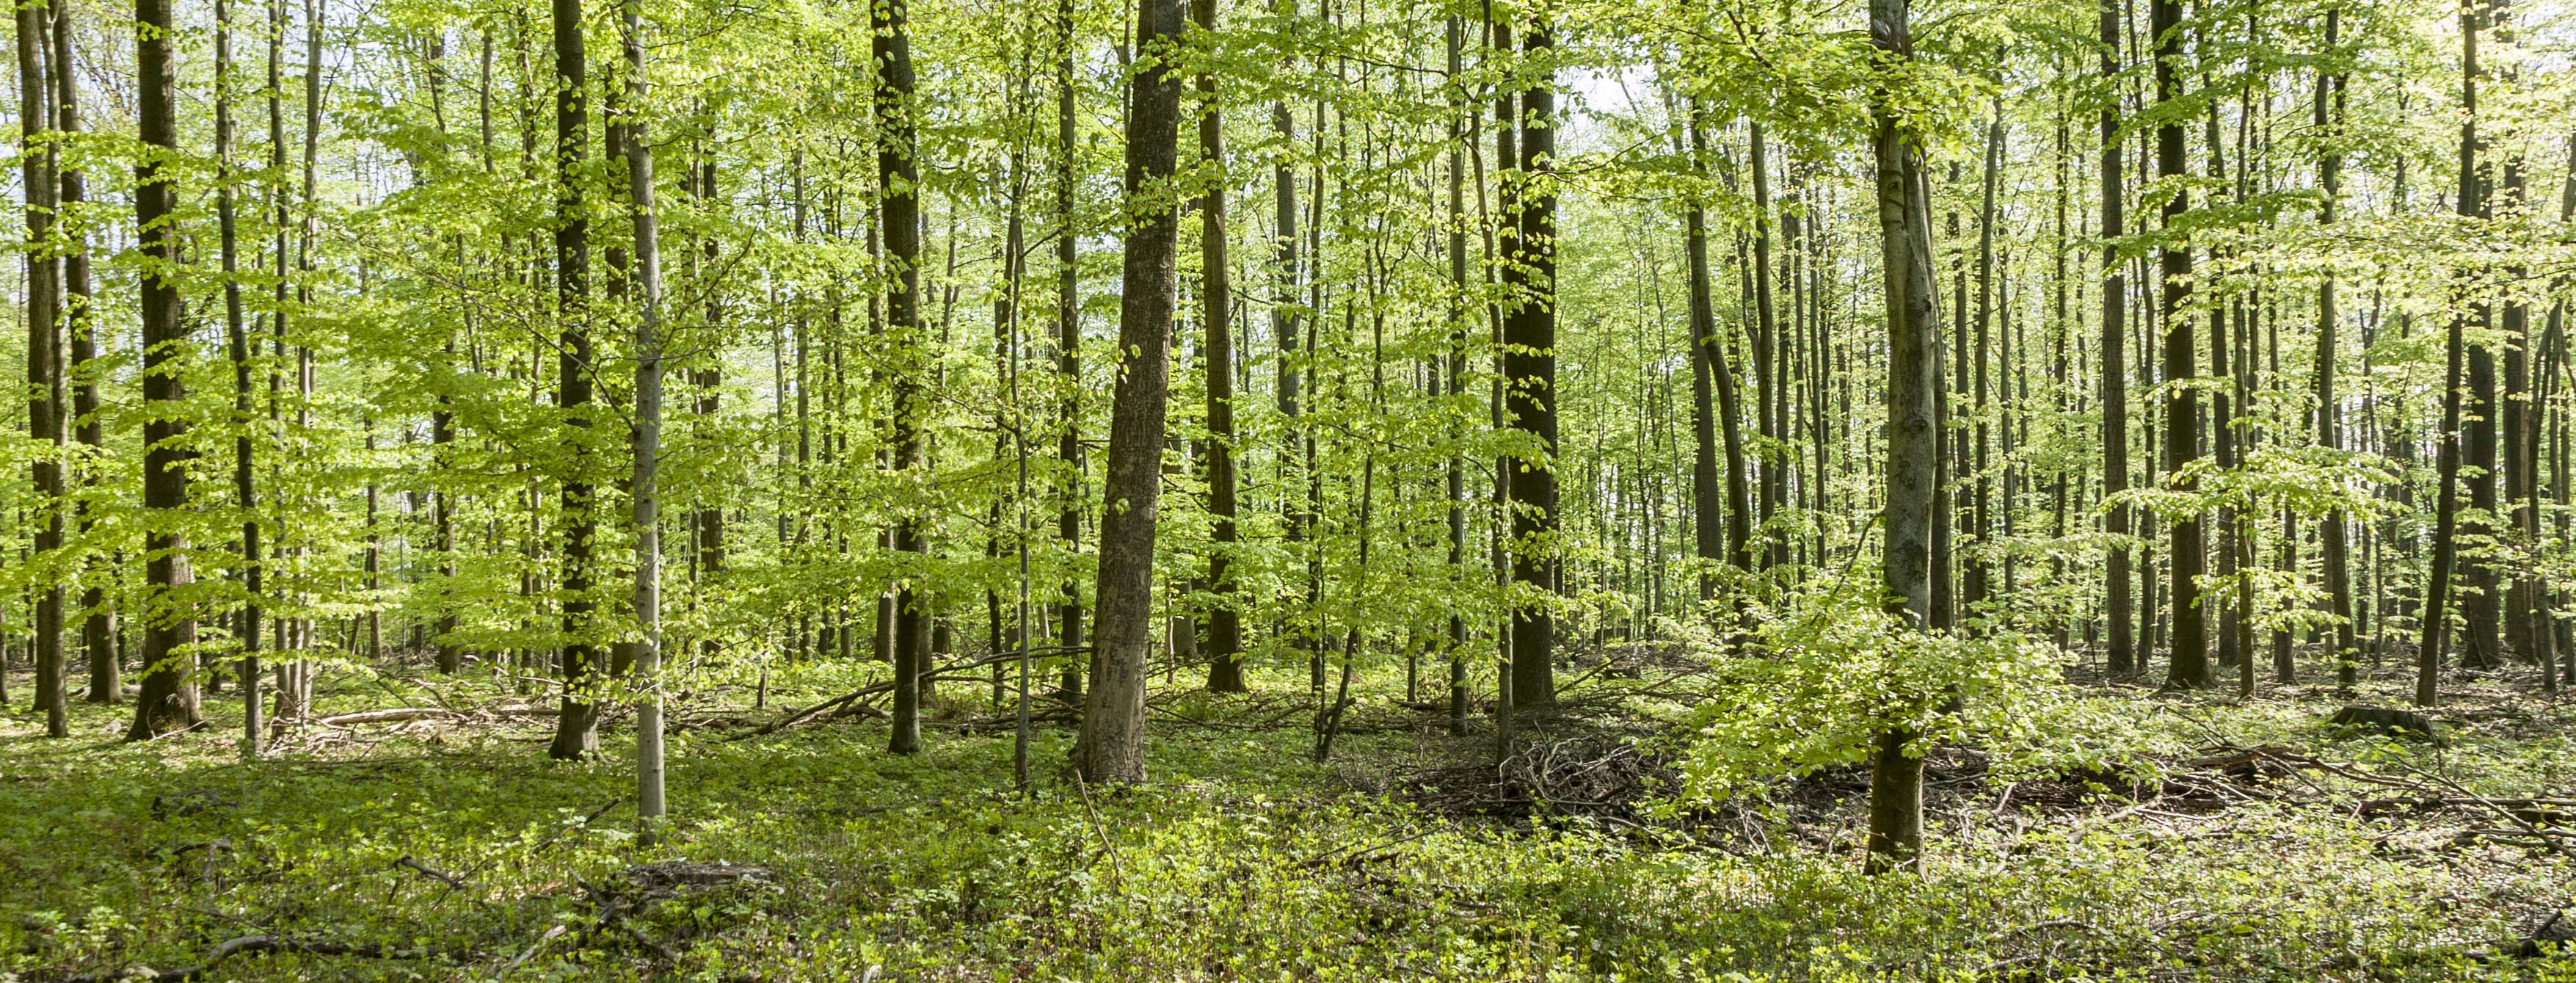 CJEU decision on forestry eco-impact scrutiny leads to disruption